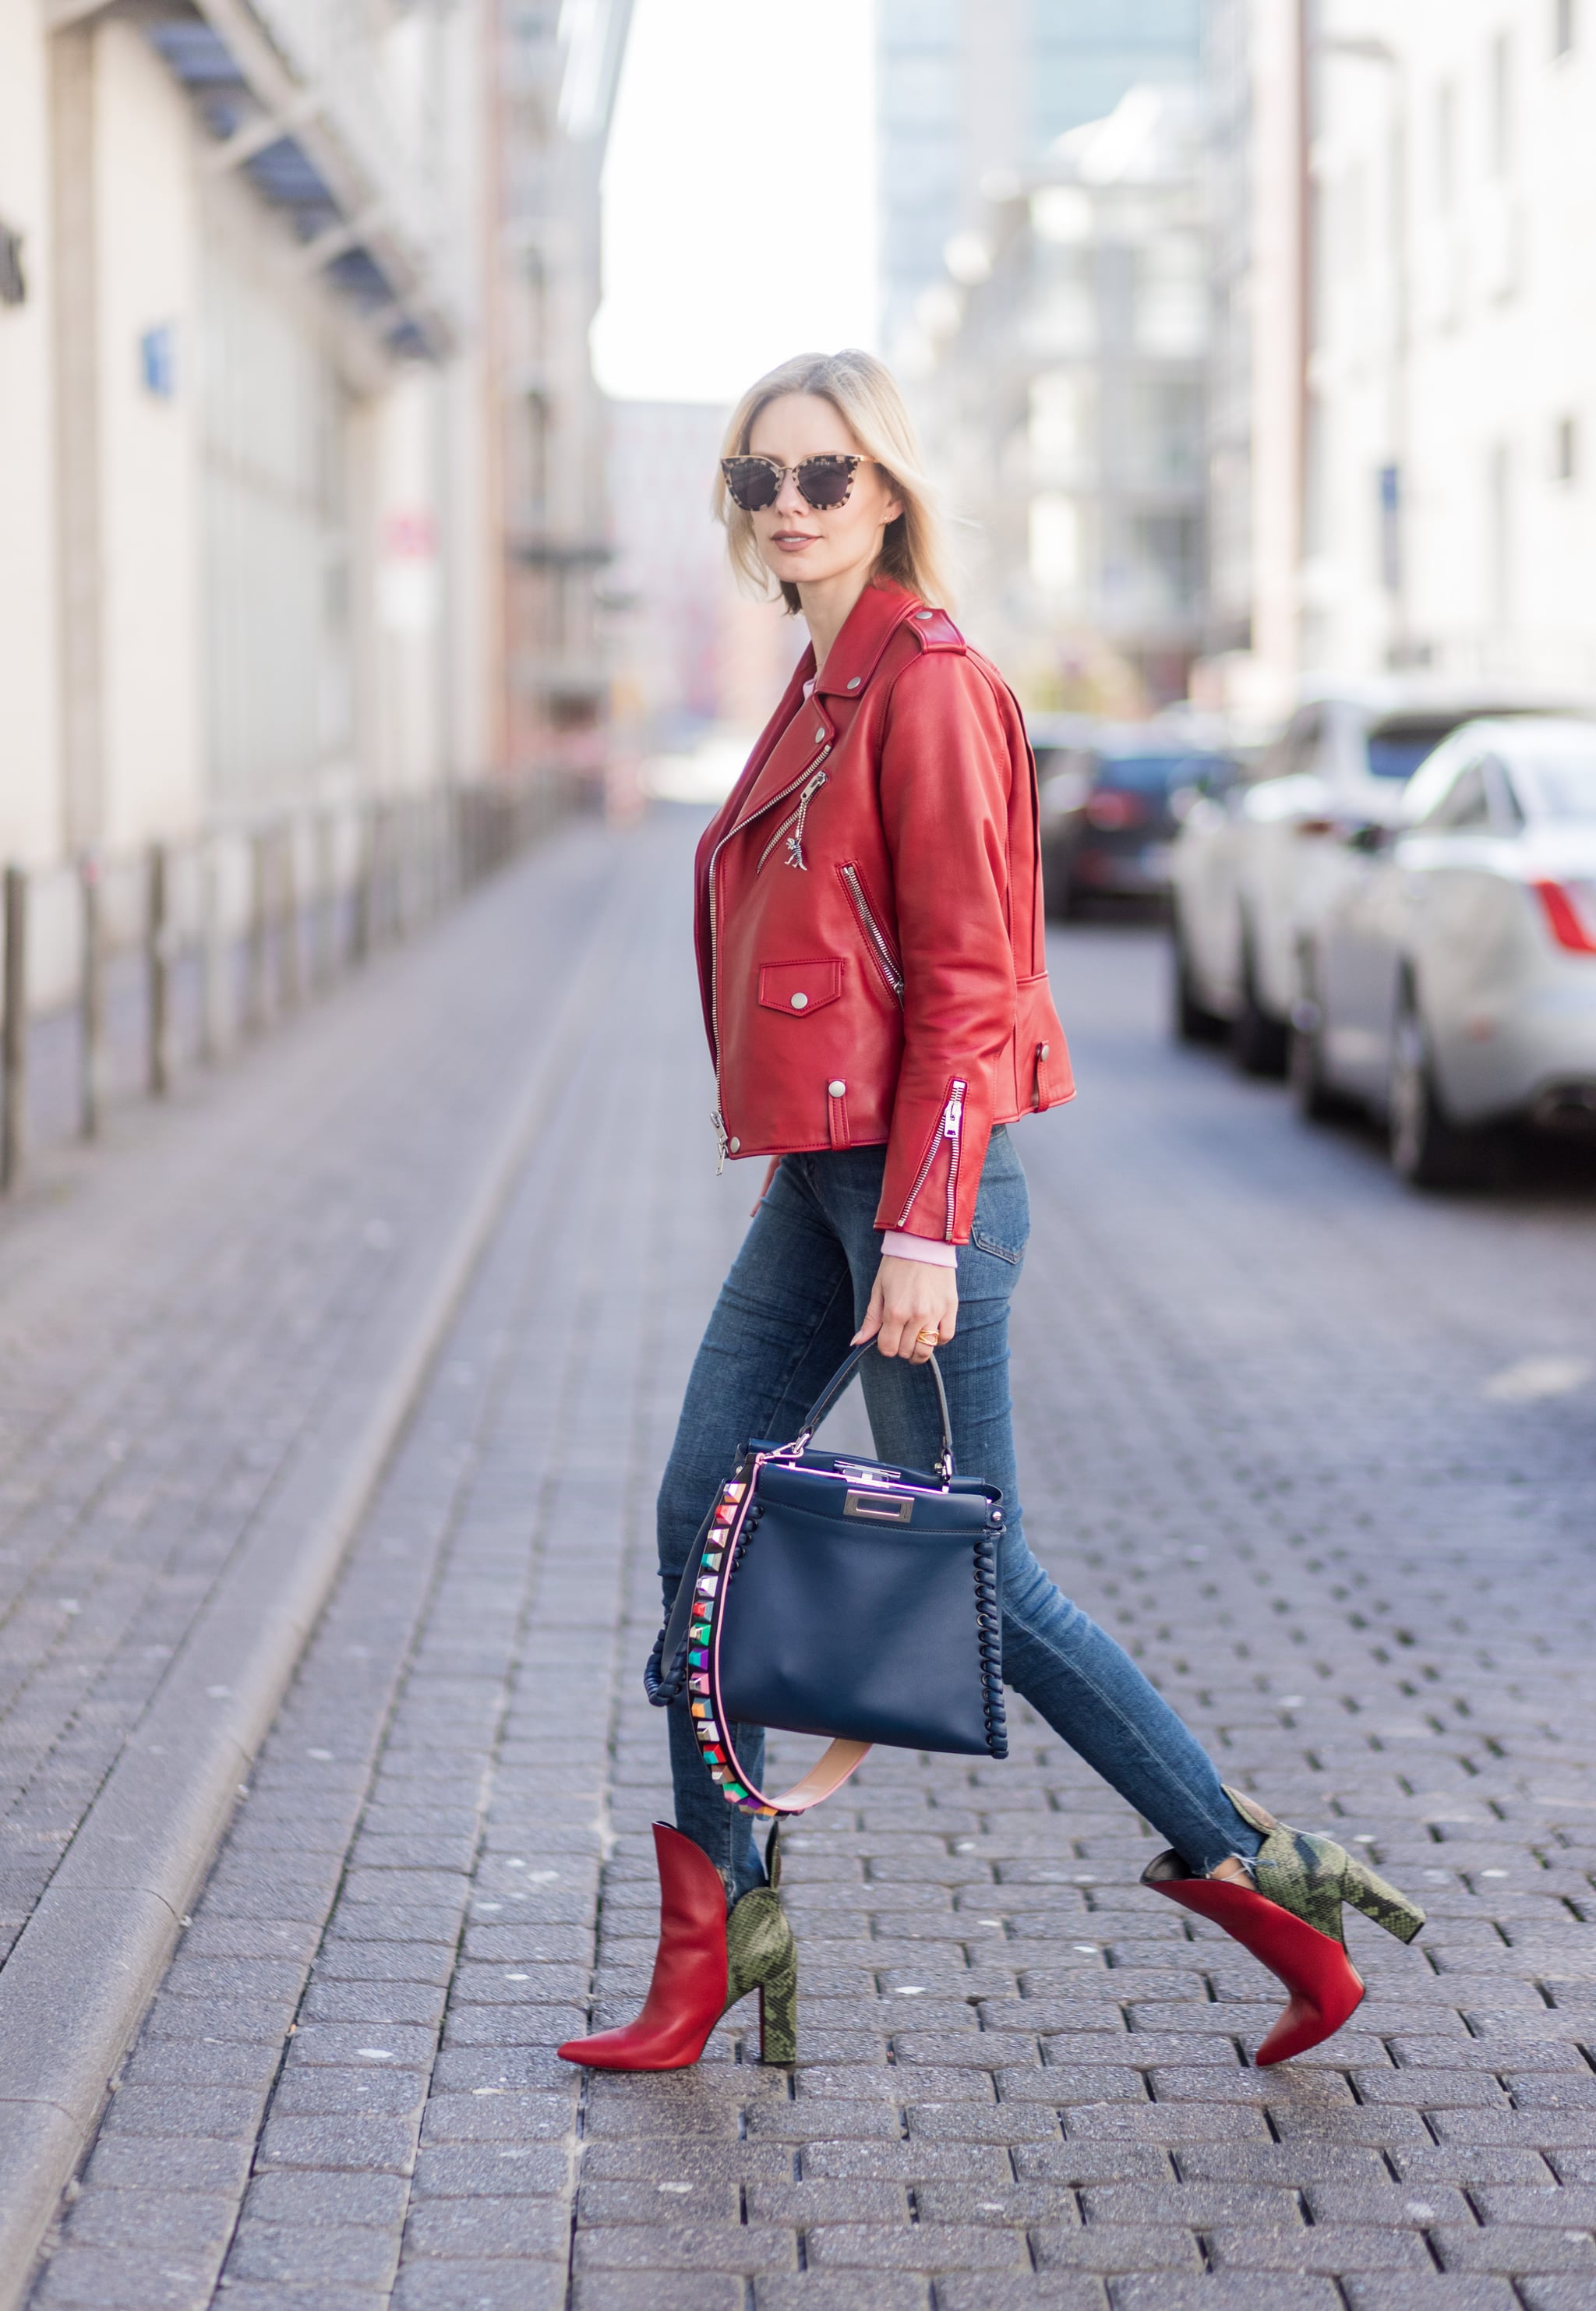 Skinny Jeans, a Red Leather Jacket, Bold Ankle Boots | 34 Outfit Ideas That You'll Love Wearing This Fall | POPSUGAR Fashion 20